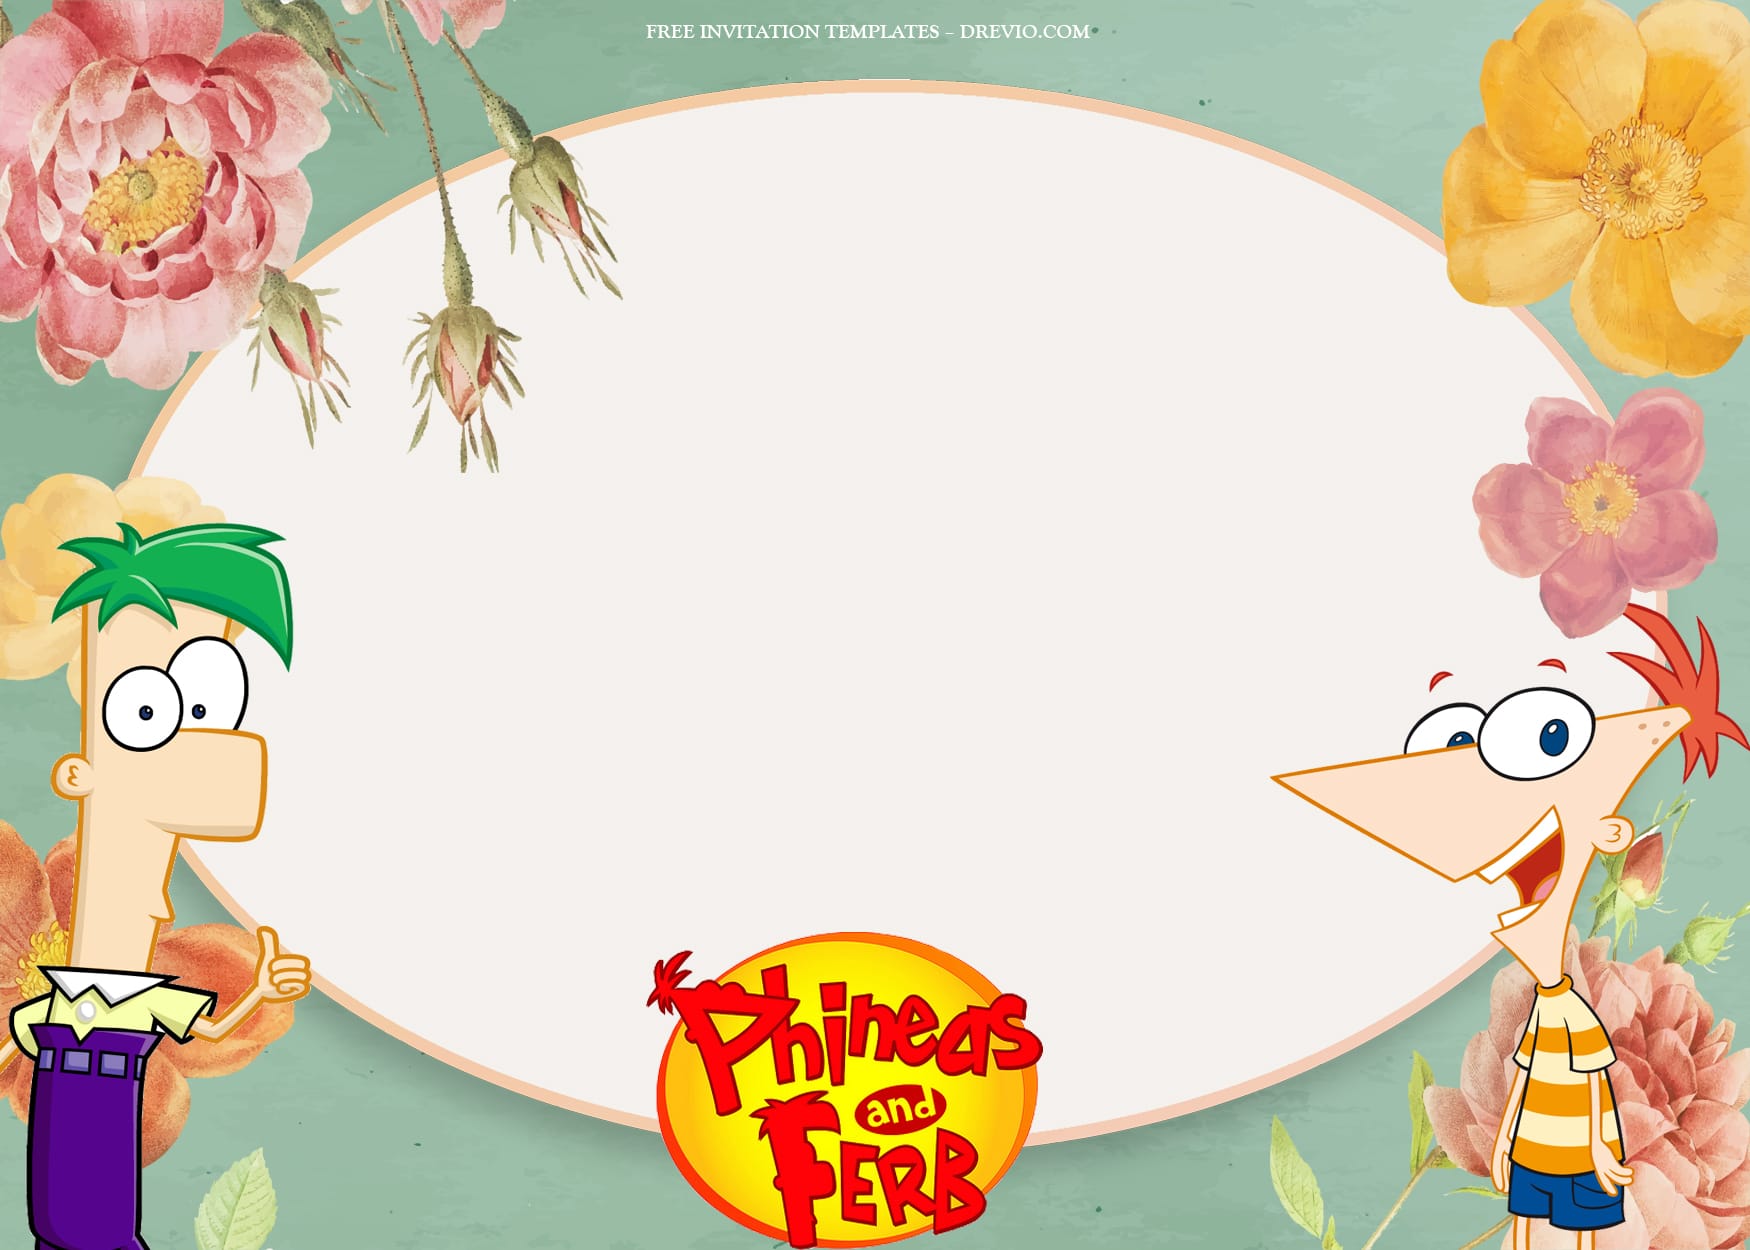 7+ Adventure Together Phineas And Ferb Birthday Invitation Templates Type One